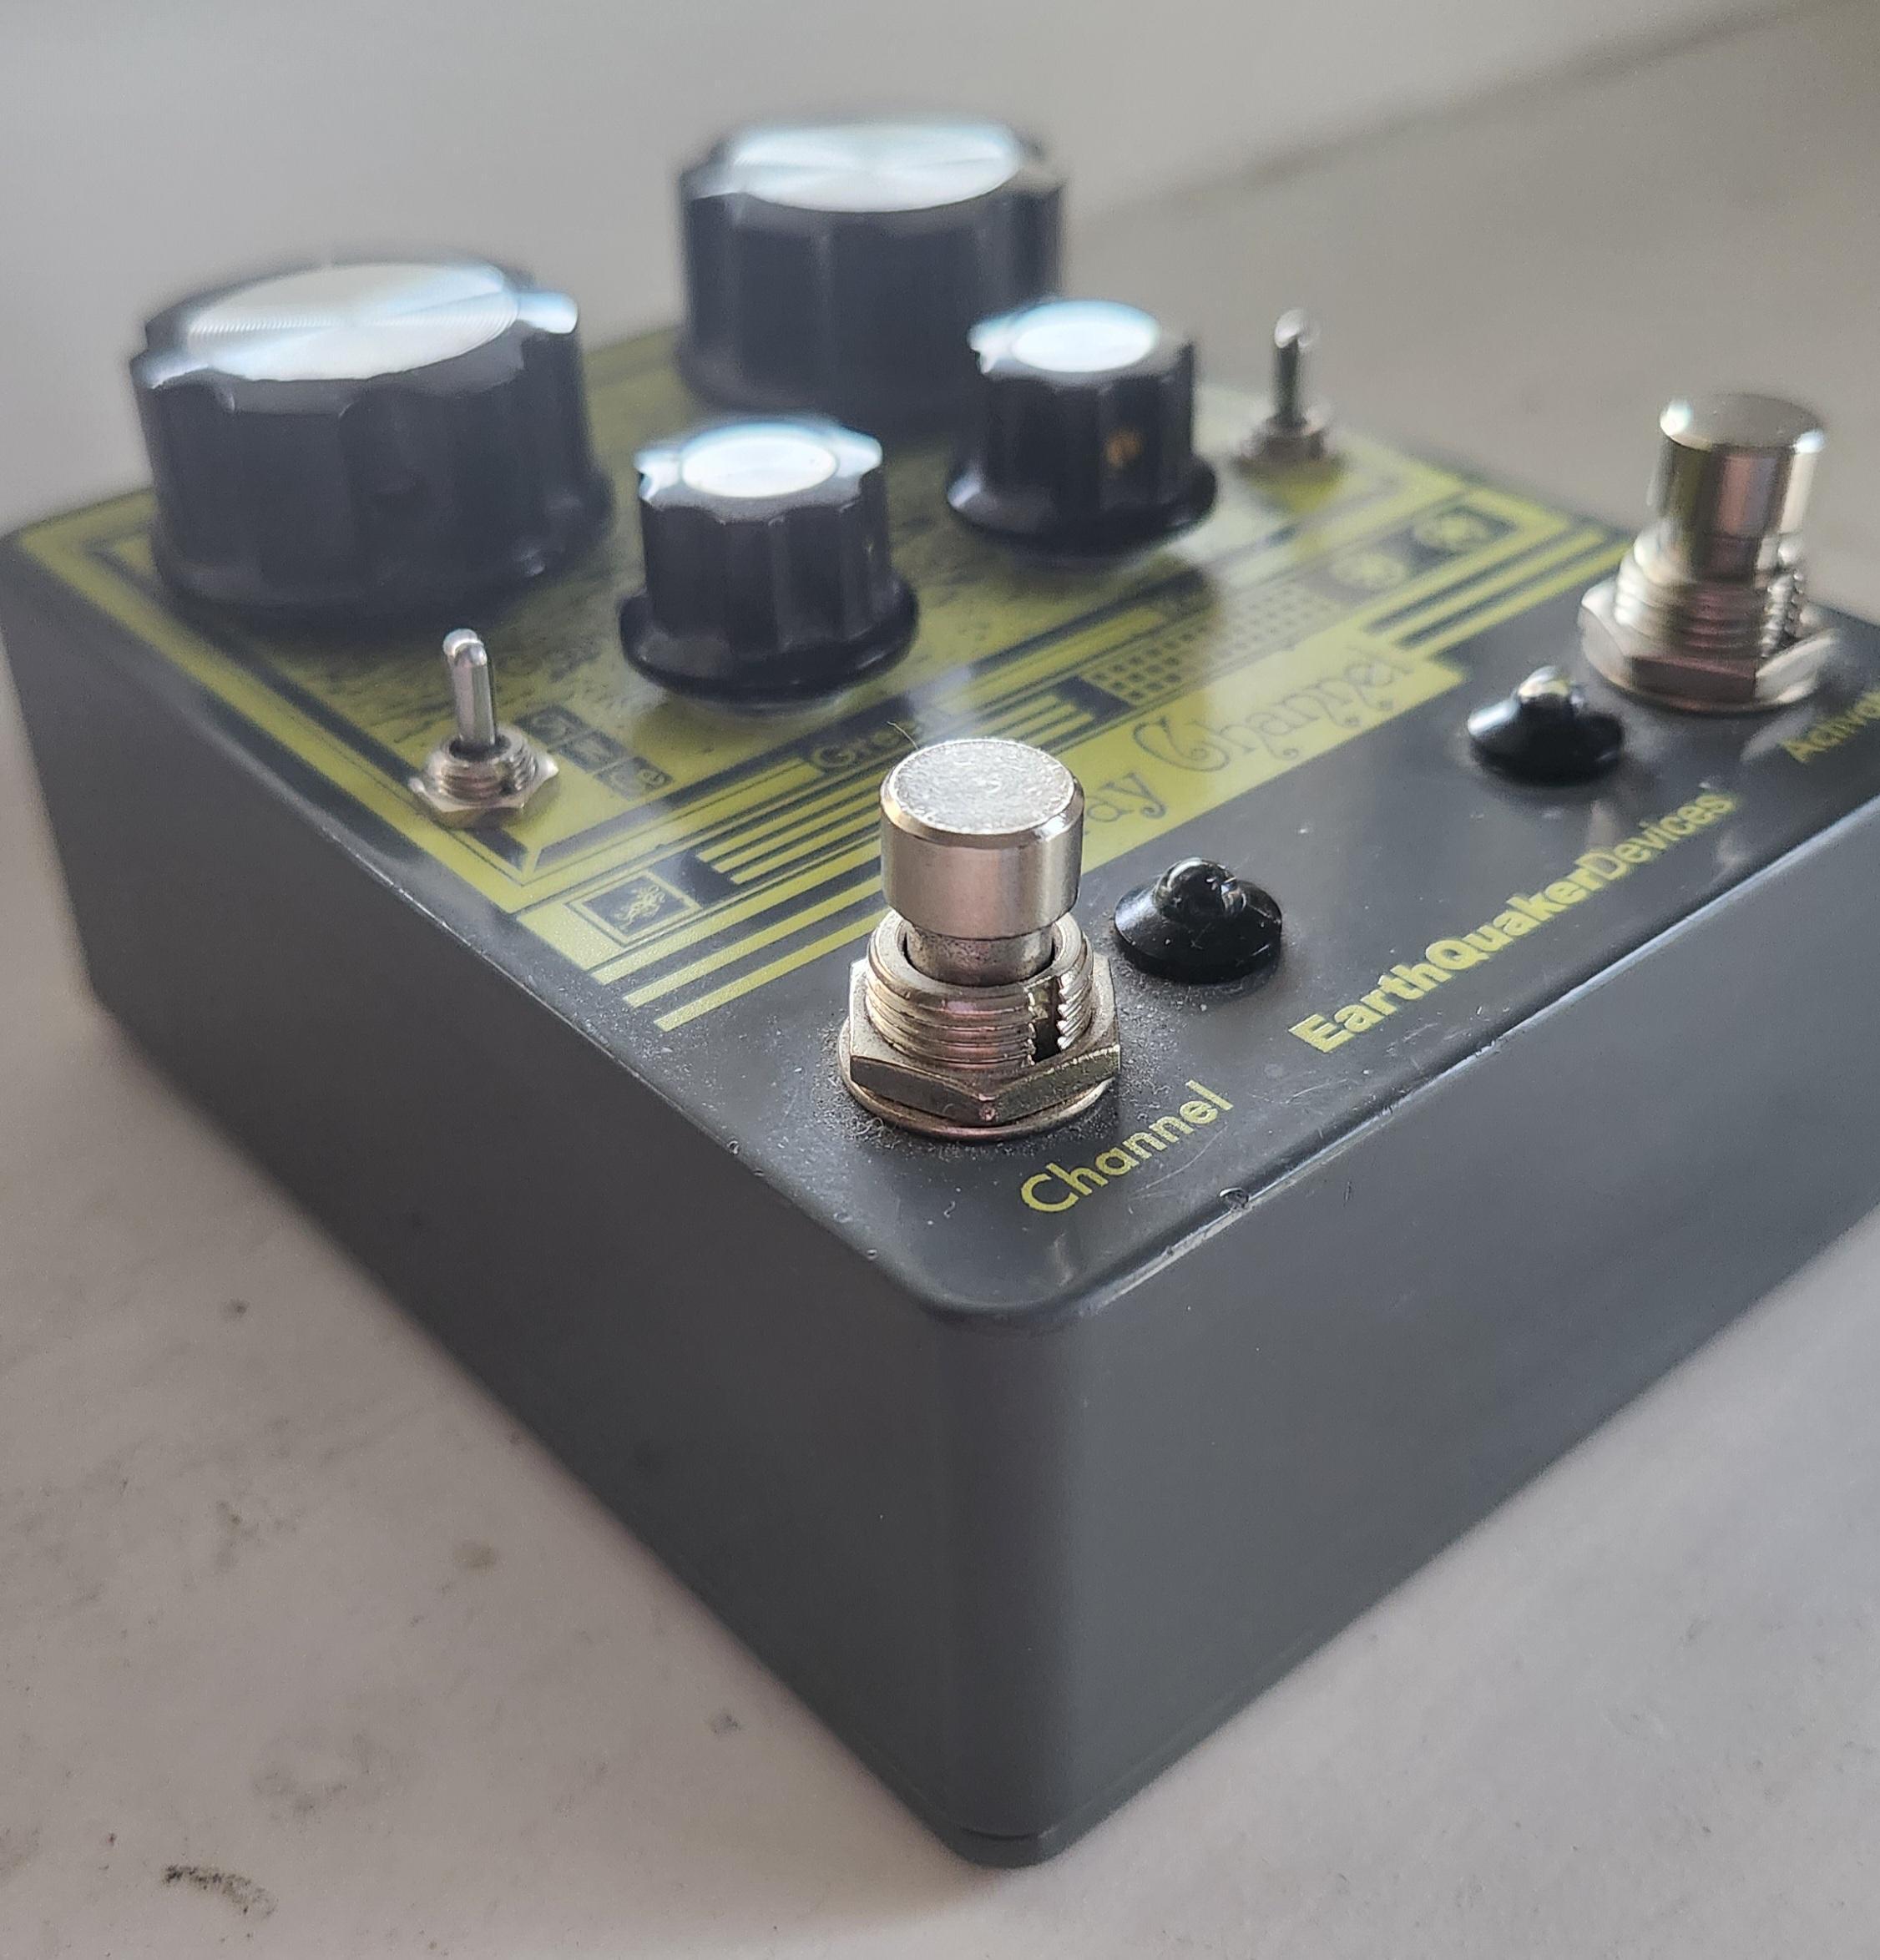 Used EarthQuaker Devices Grey Channel EQD - Sweetwater's Gear Exchange